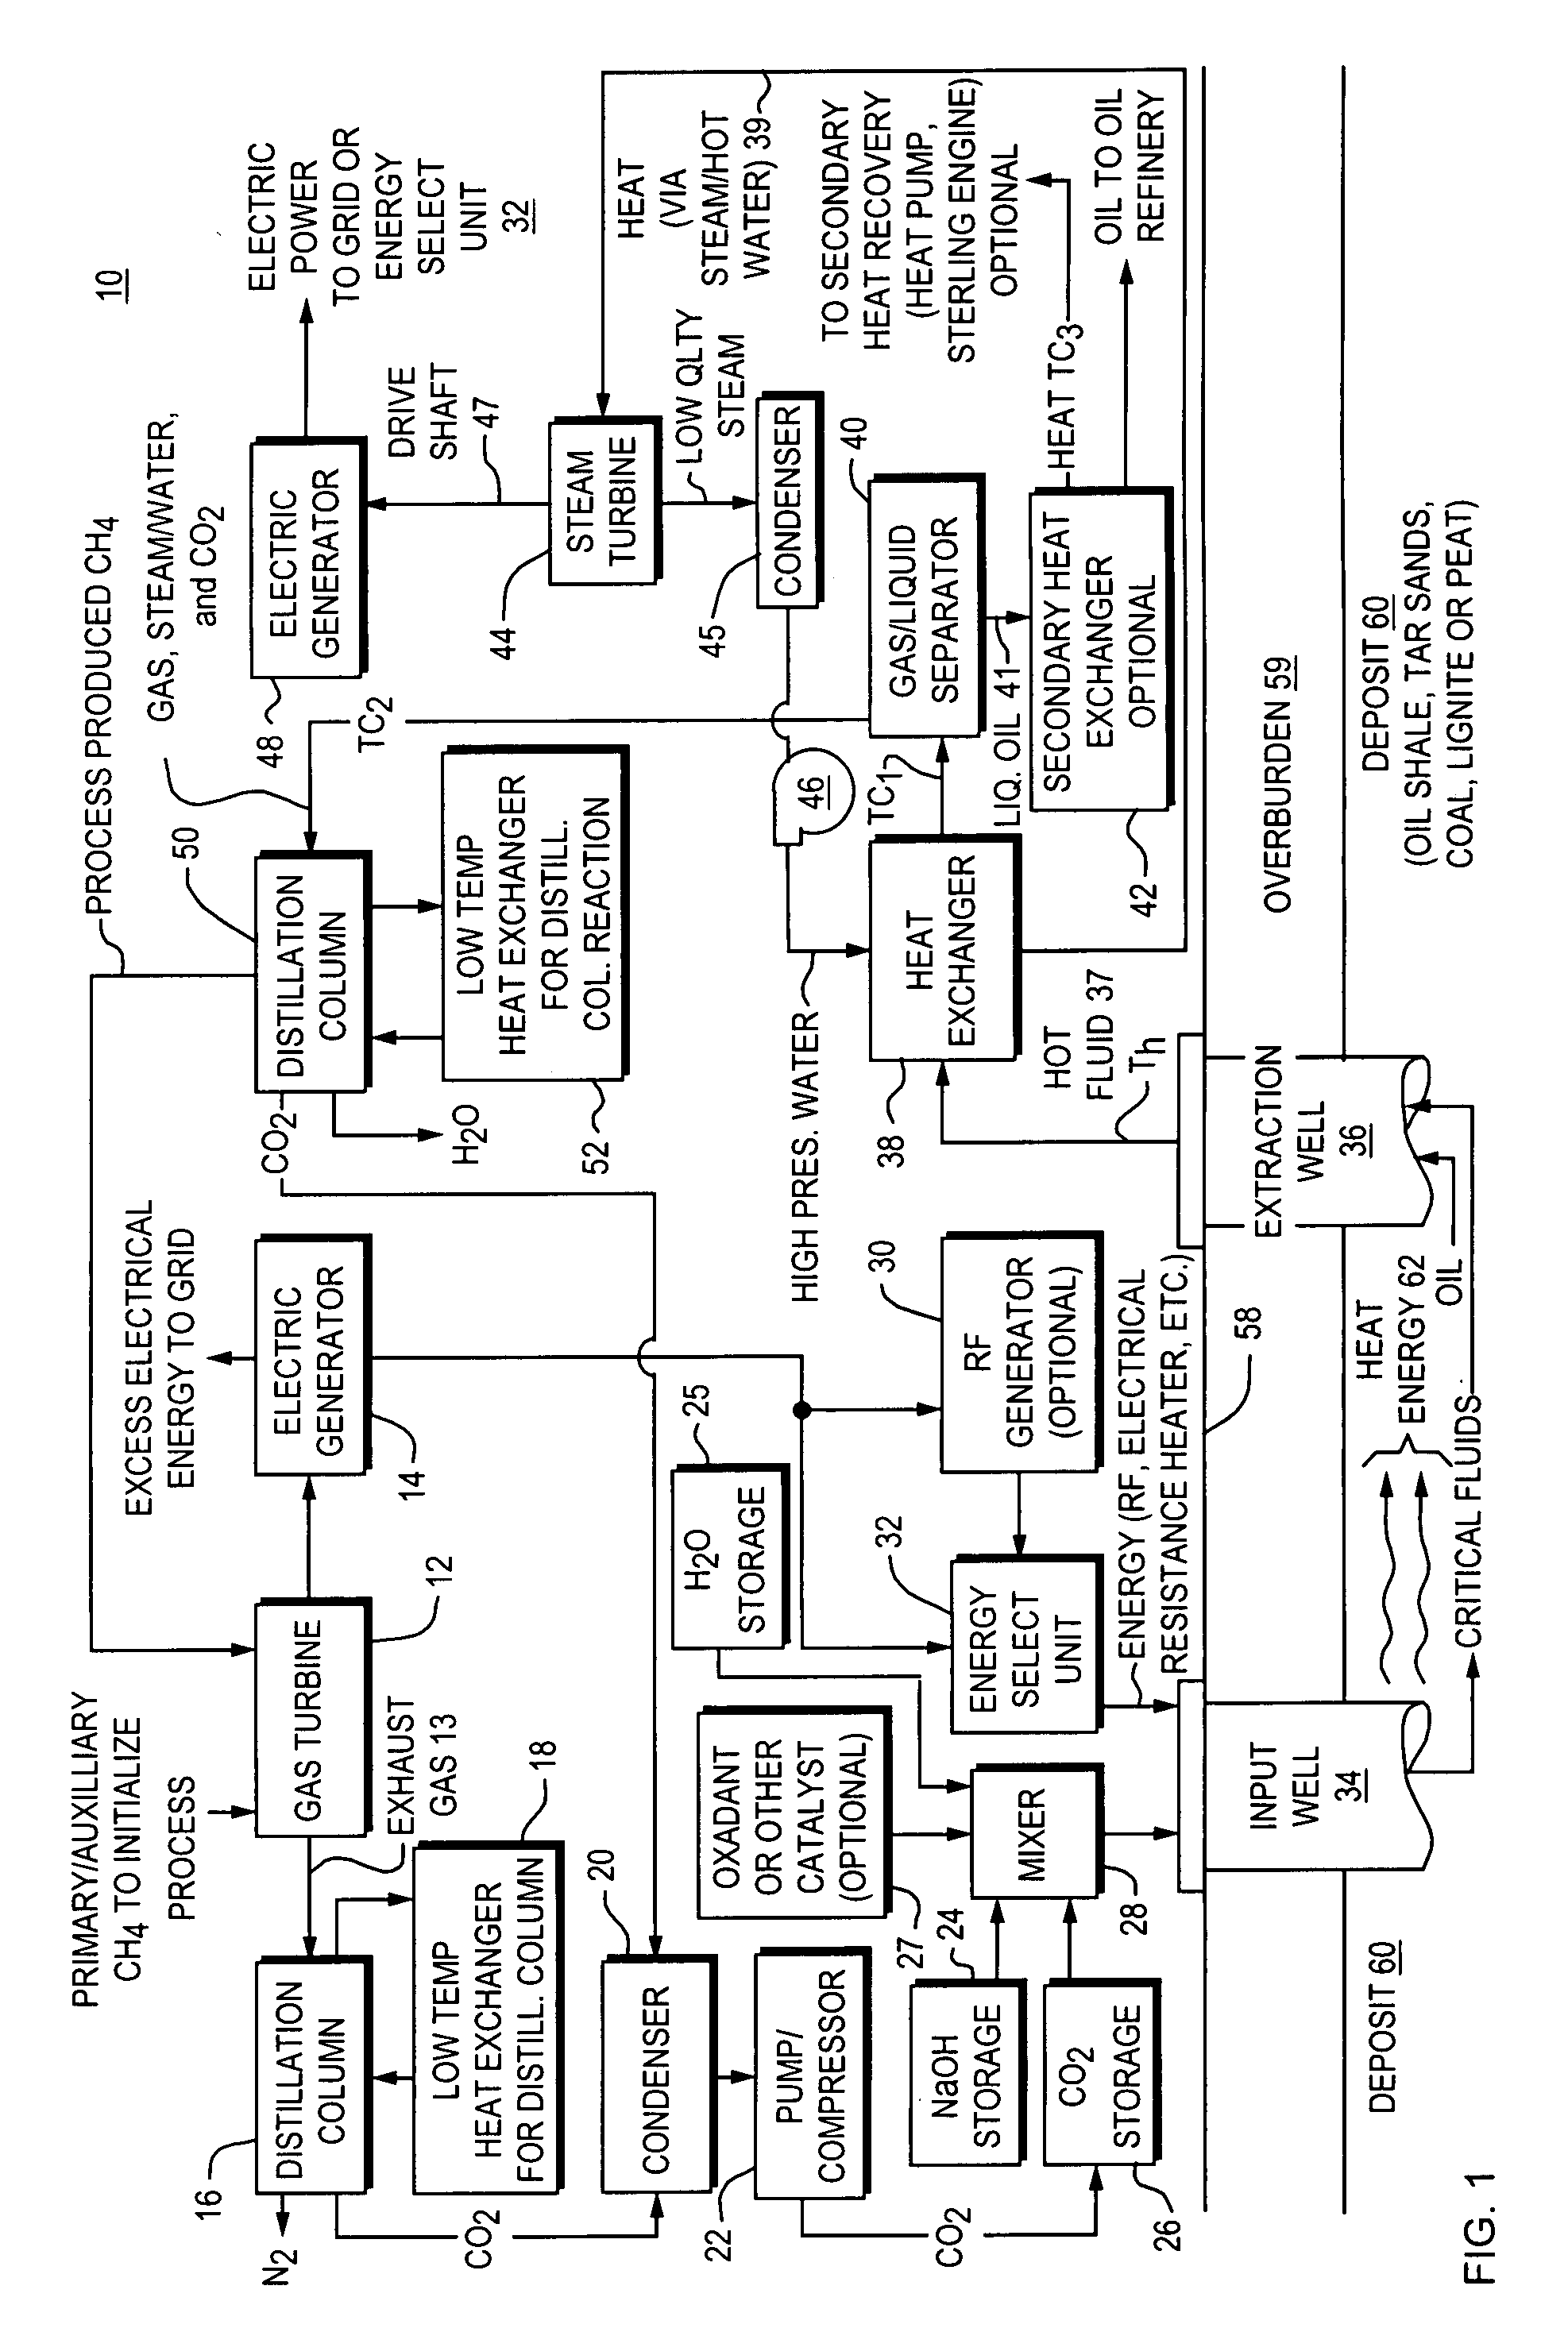 Method and apparatus for capture and sequester of carbon dioxide and extraction of energy from large land masses during and after extraction of hydrocarbon fuels or contaminants using energy and critical fluids